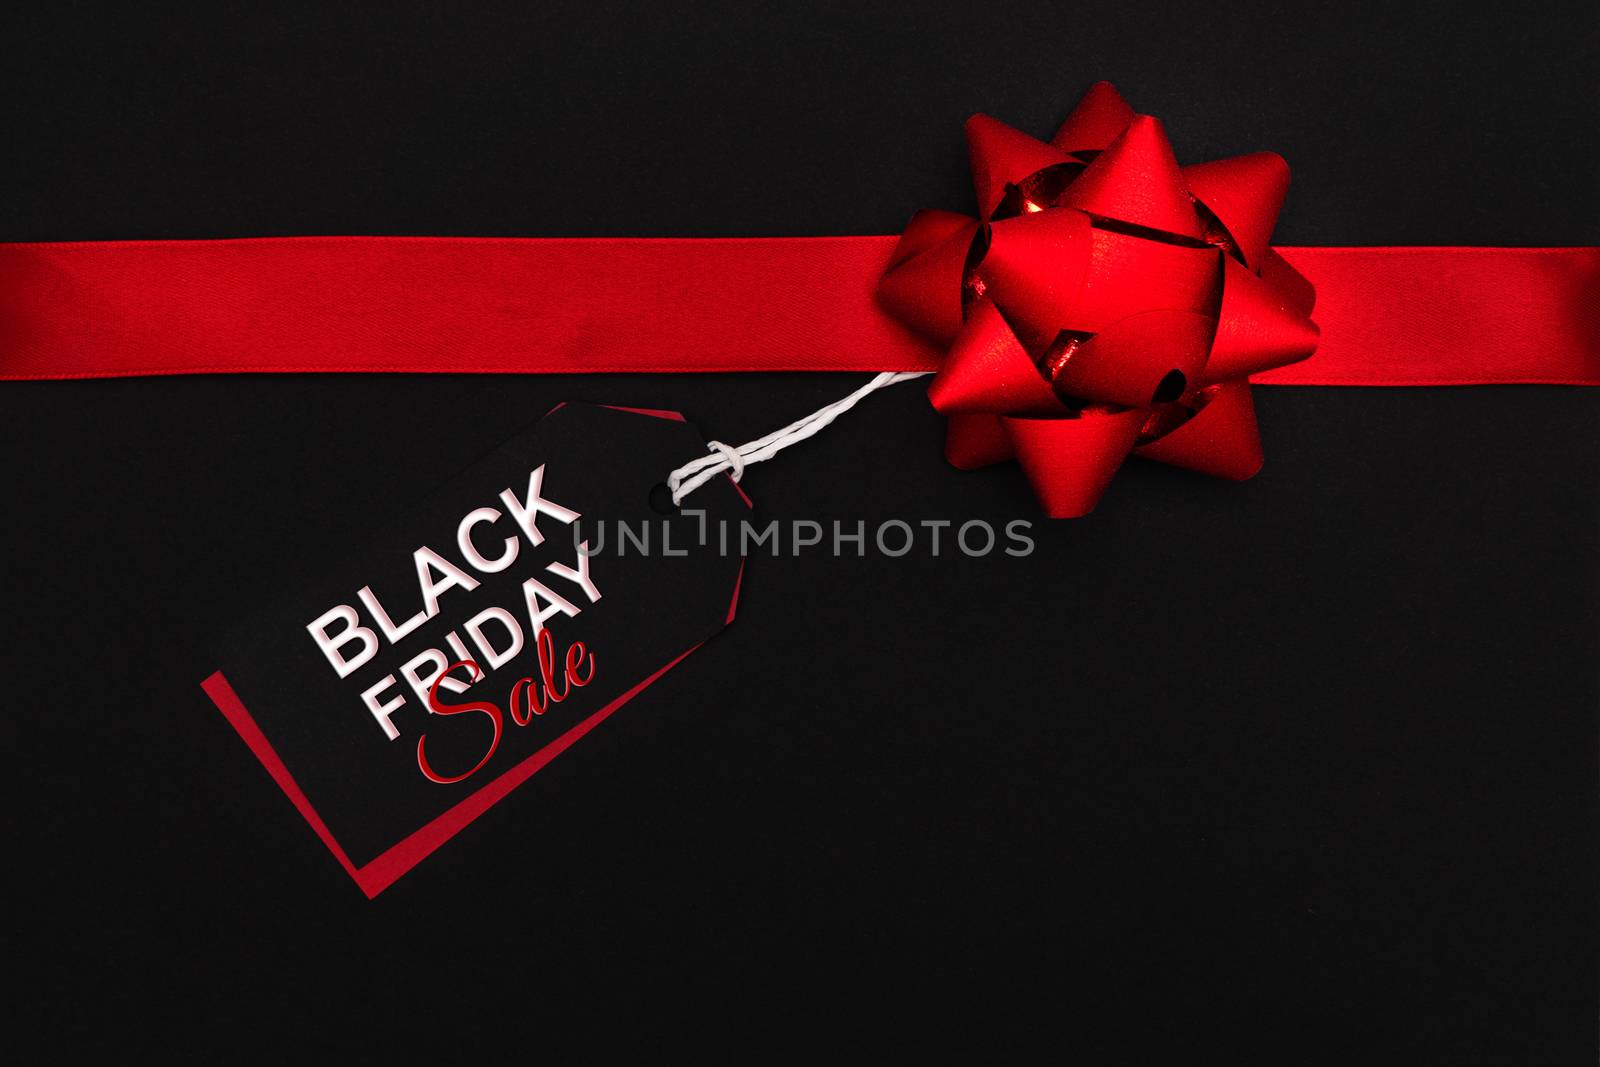 Black Friday sale, luxury gift box with price tag